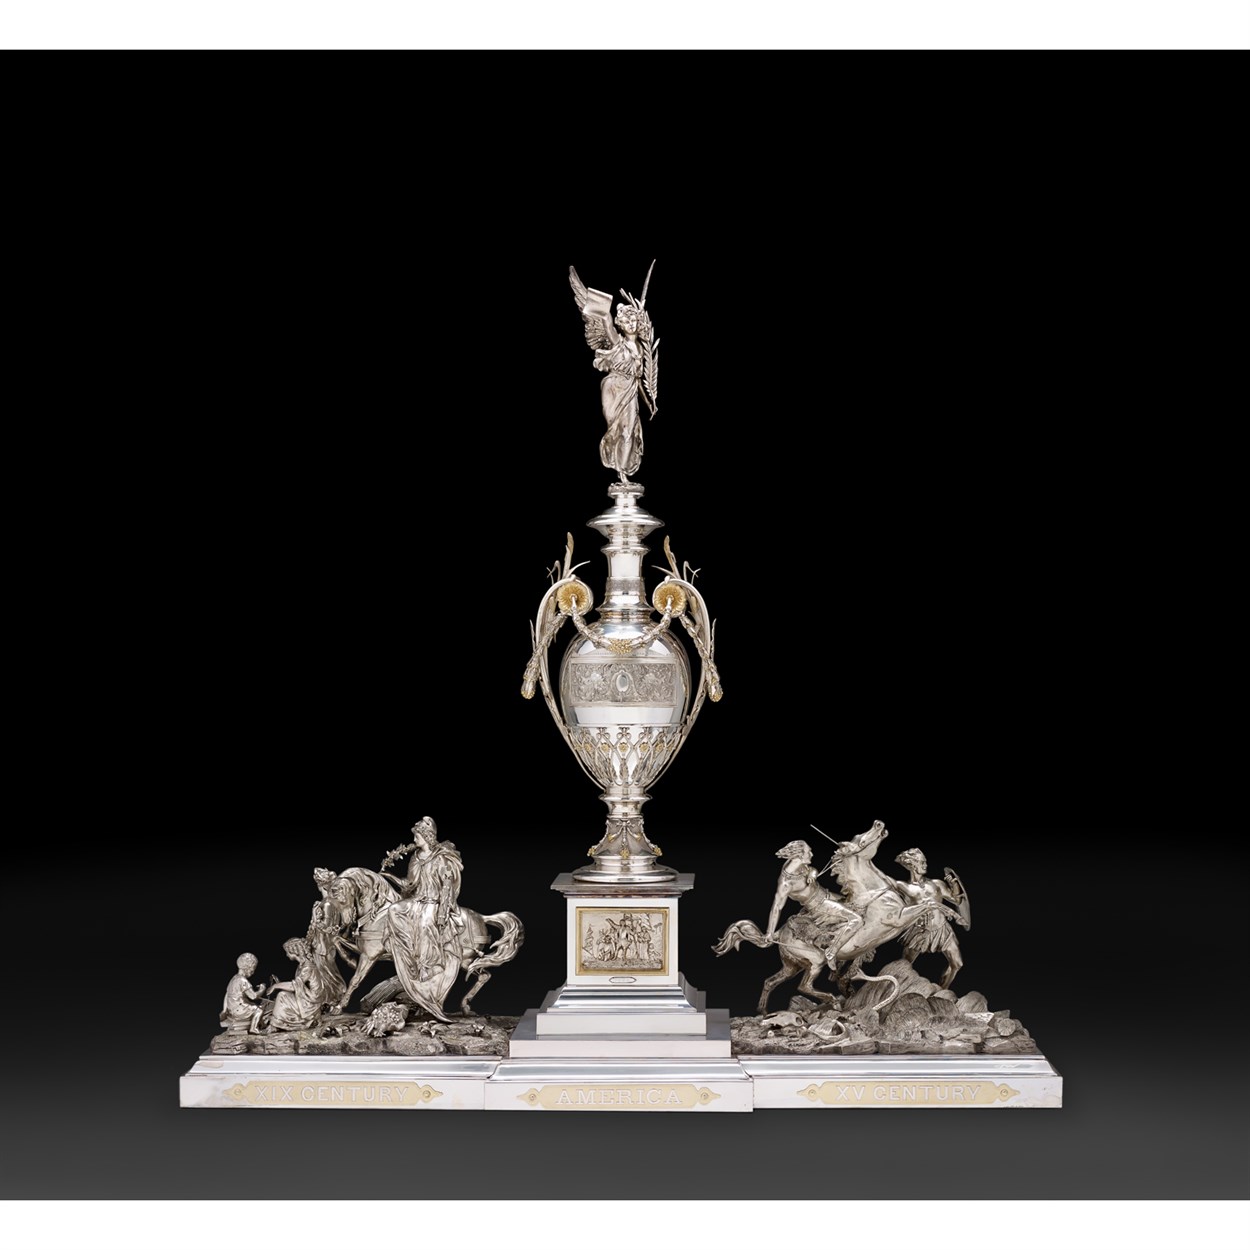 Lot 266 - The Progress Vase: A Magnificent Sterling Silver and Silver-plated Centerpiece